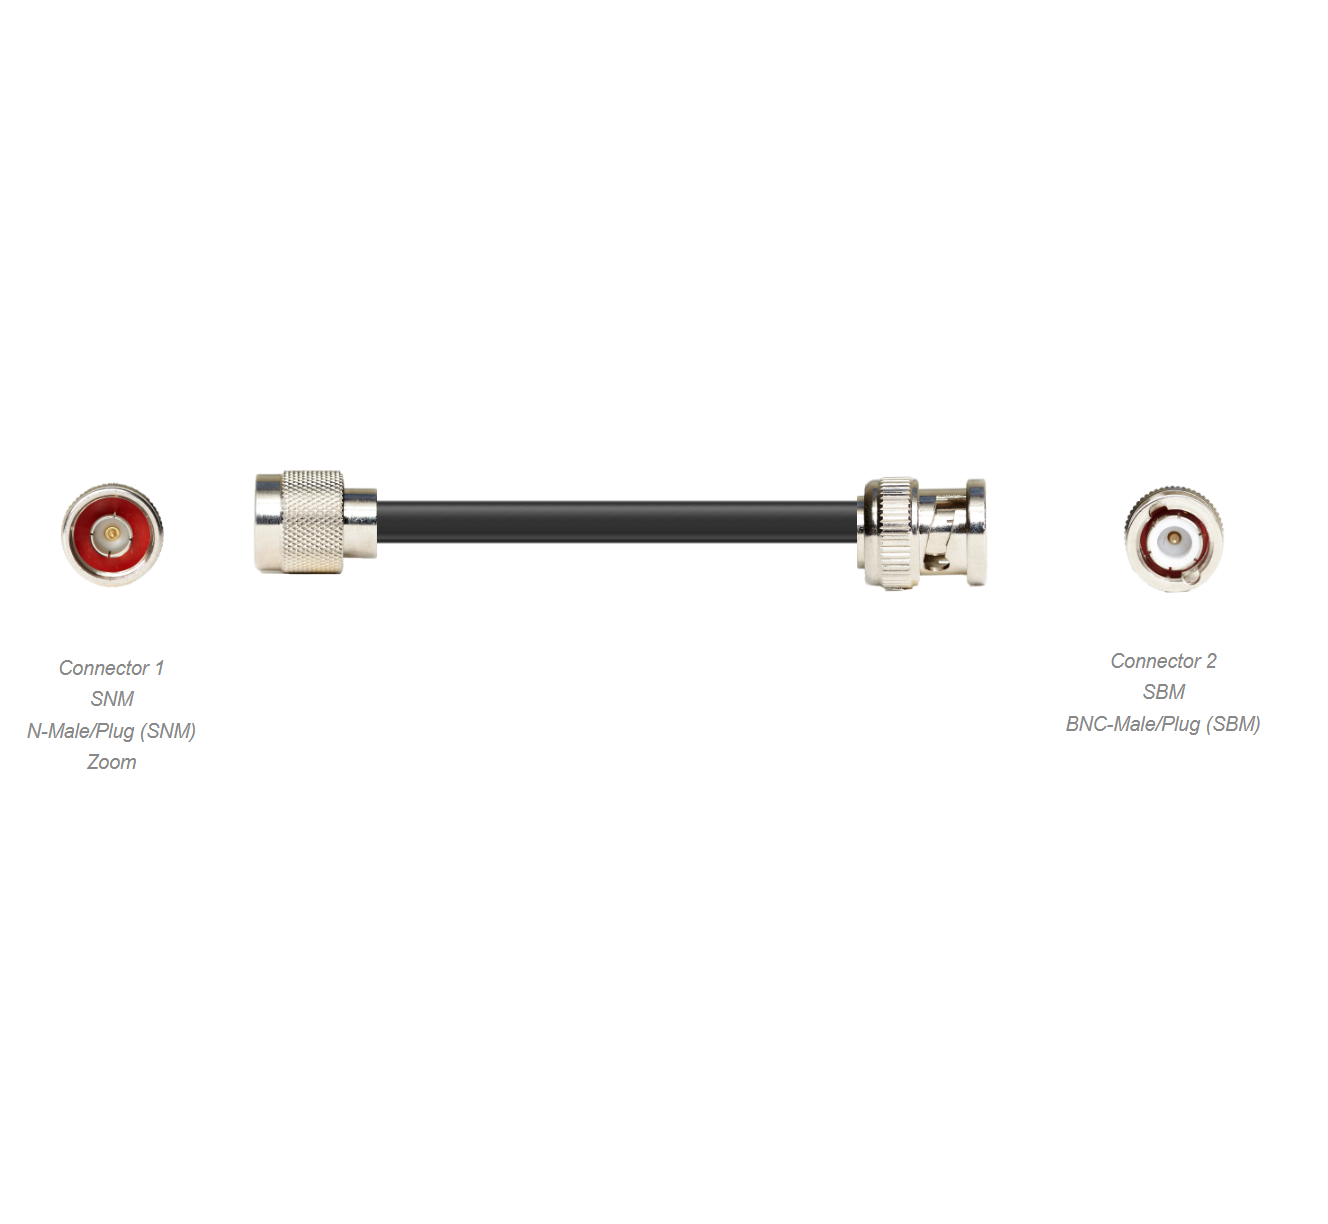 PT400-075-SBM-SNM: 75 Feet 400 Type Low loss Cable Assembly with BNC-Male and N-Male Connectors